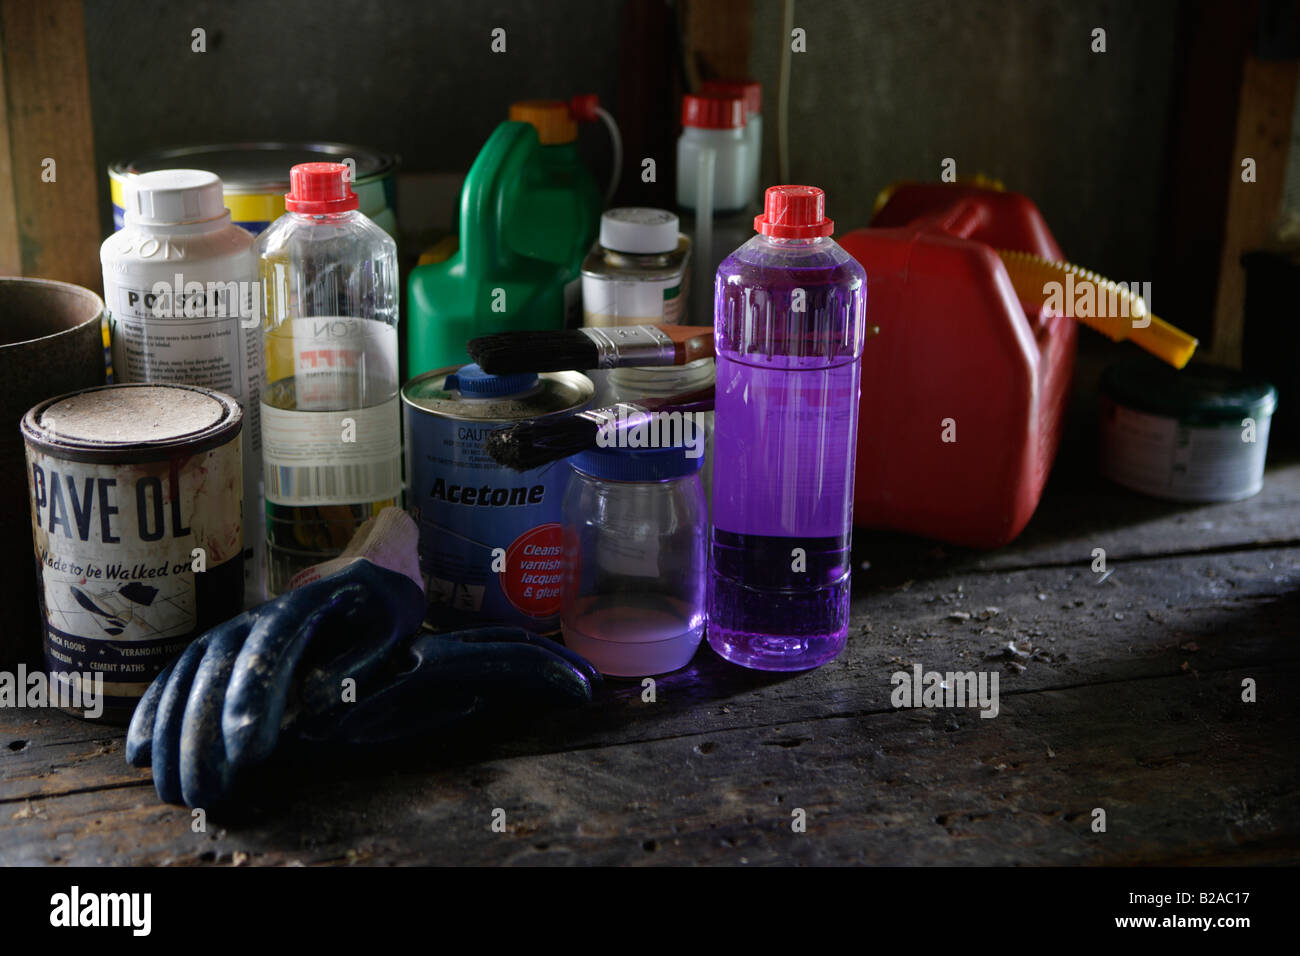 Poisonous household products in a garden shed Methylated spirits turpentine paint stripper petrol can gloves Stock Photo